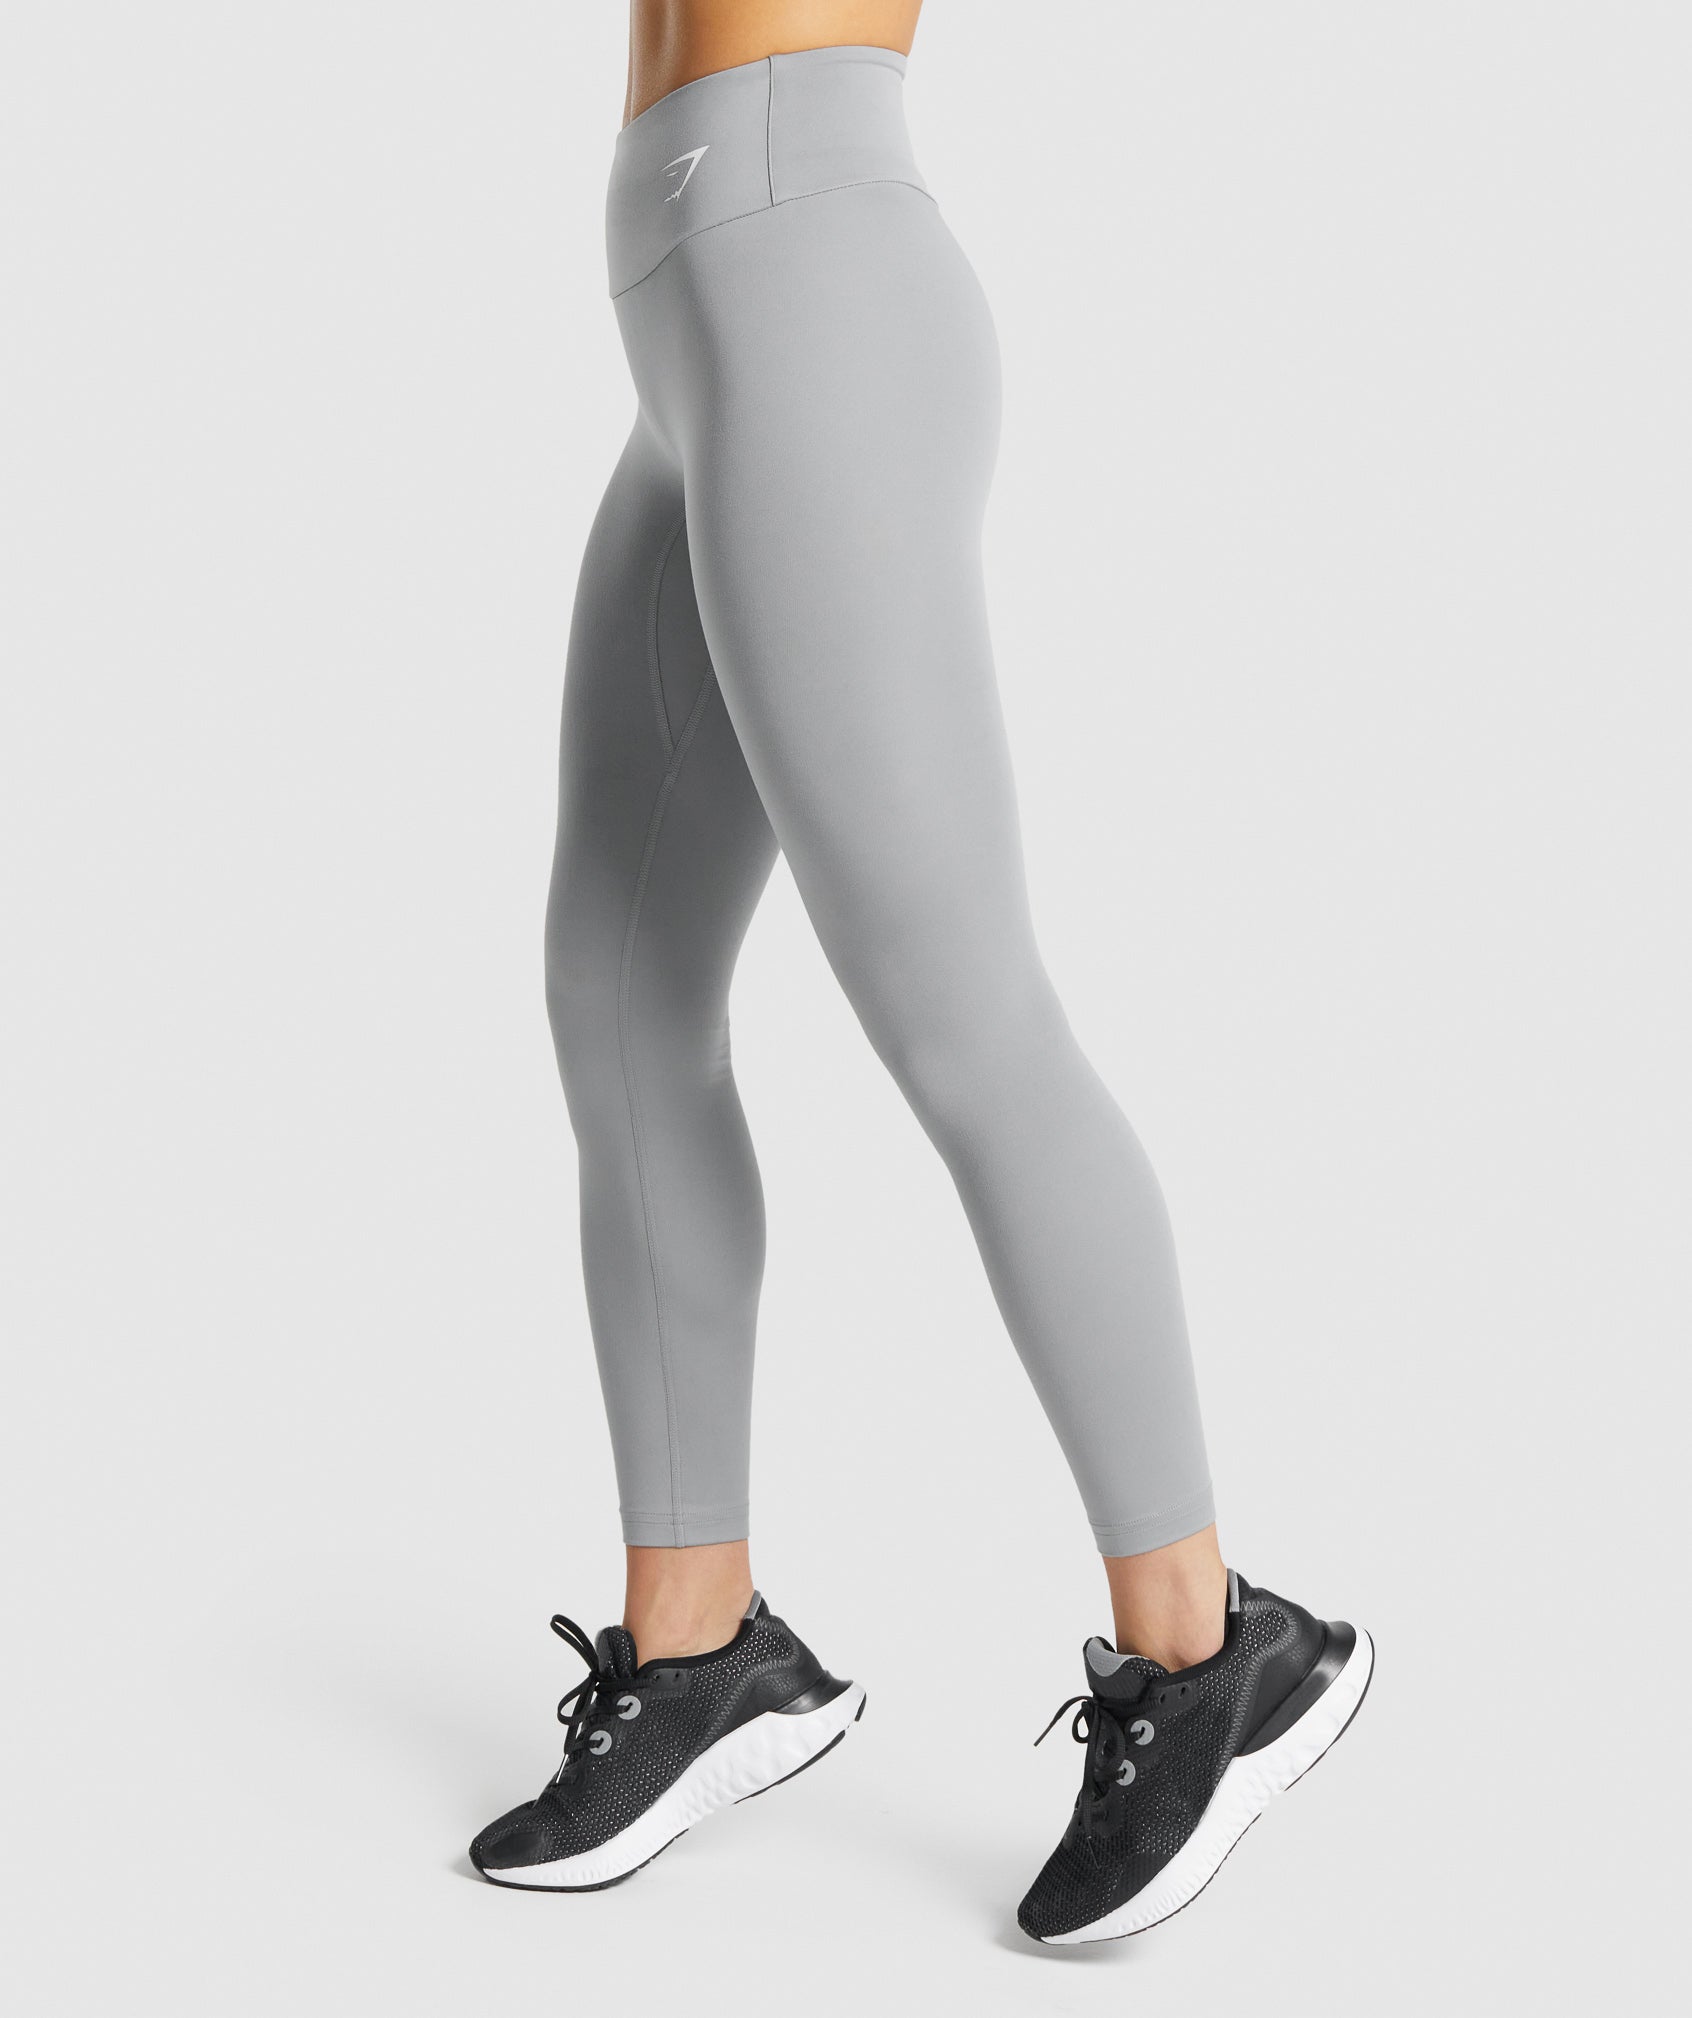 Gymshark leggings Gray Size XS - $30 (40% Off Retail) - From Malena